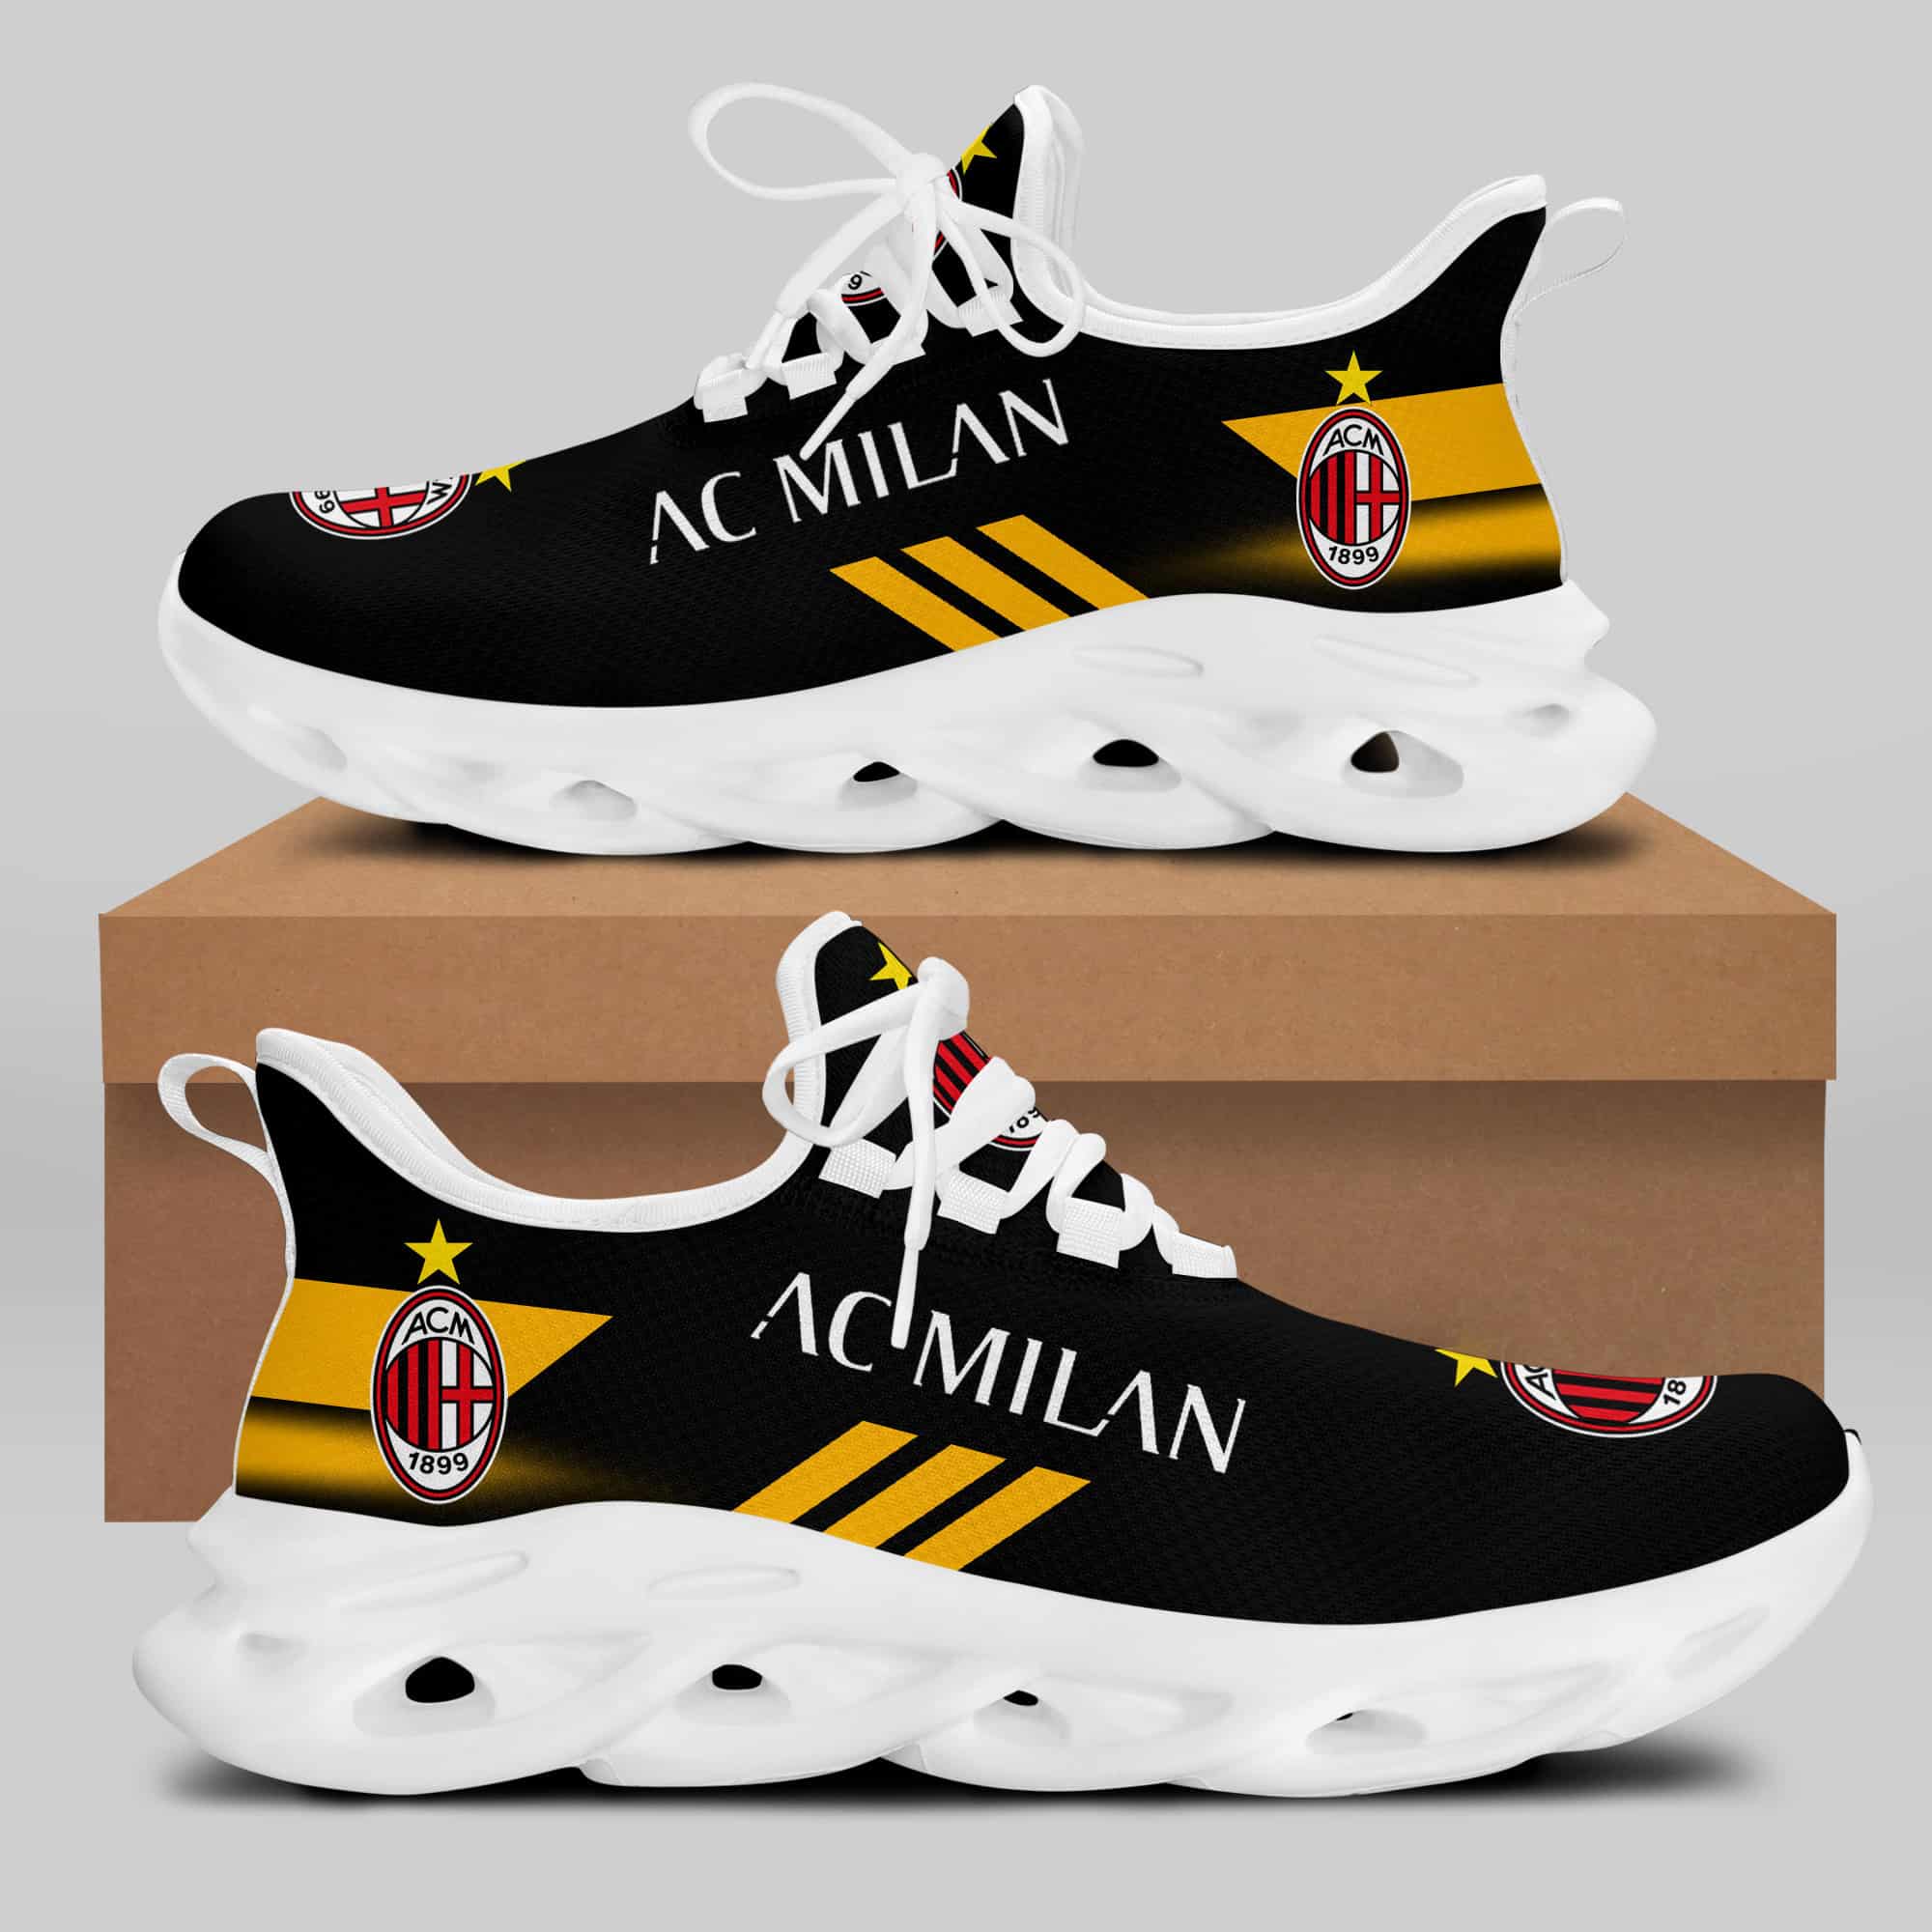 Ac Milan Running Shoes Max Soul Shoes Sneakers Ver 10 2